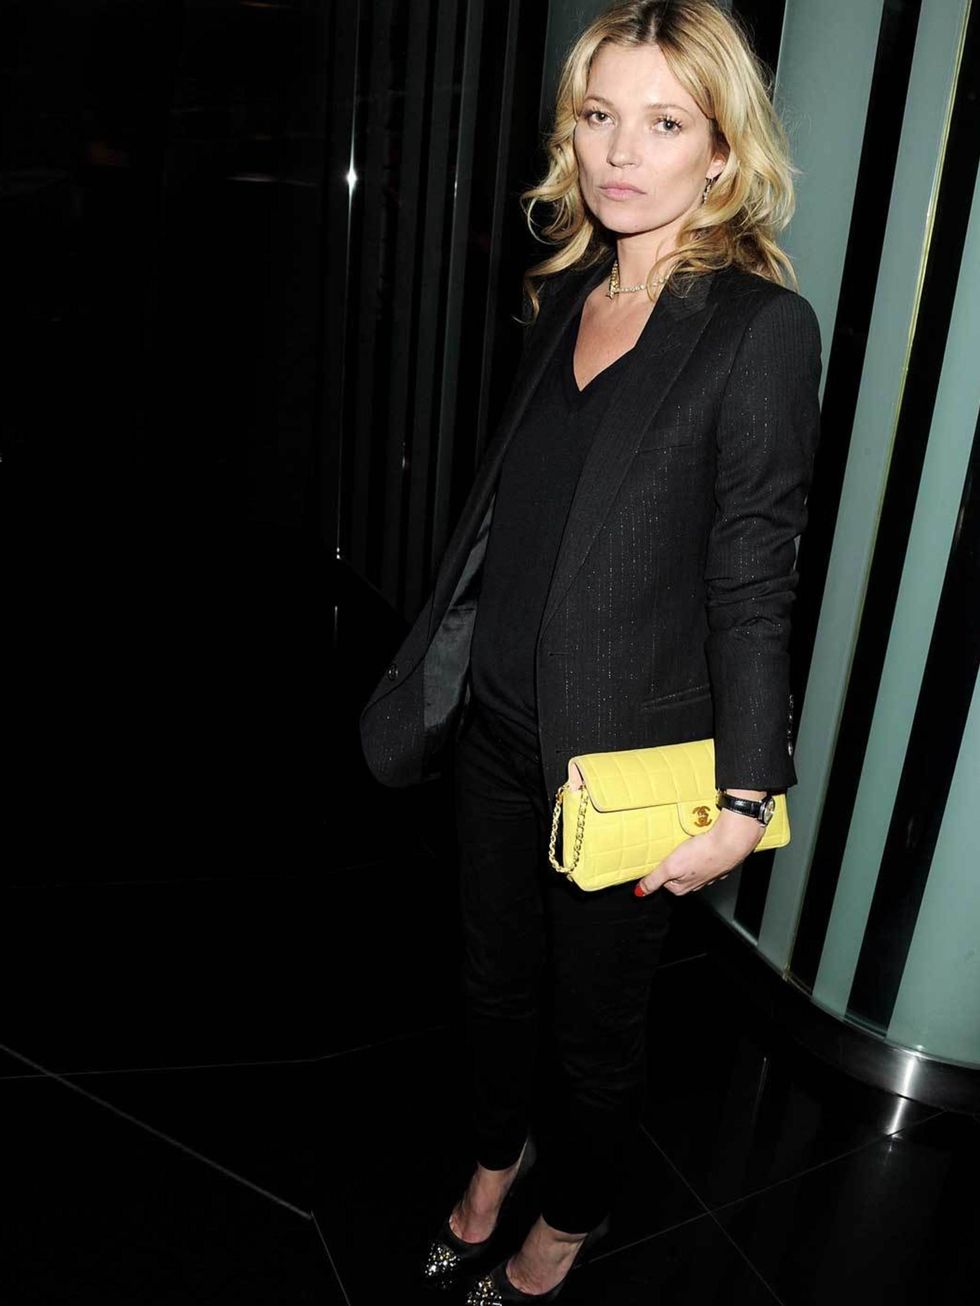 <p><a href="http://www.elleuk.com/star-style/celebrity-style-files/kate-moss">Kate Moss</a> adds a splash of colour to her black ensemble with a classic yellow <a href="http://www.elleuk.com/catwalk/designer-a-z/chanel/autumn-winter-2012/review">Chanel</a